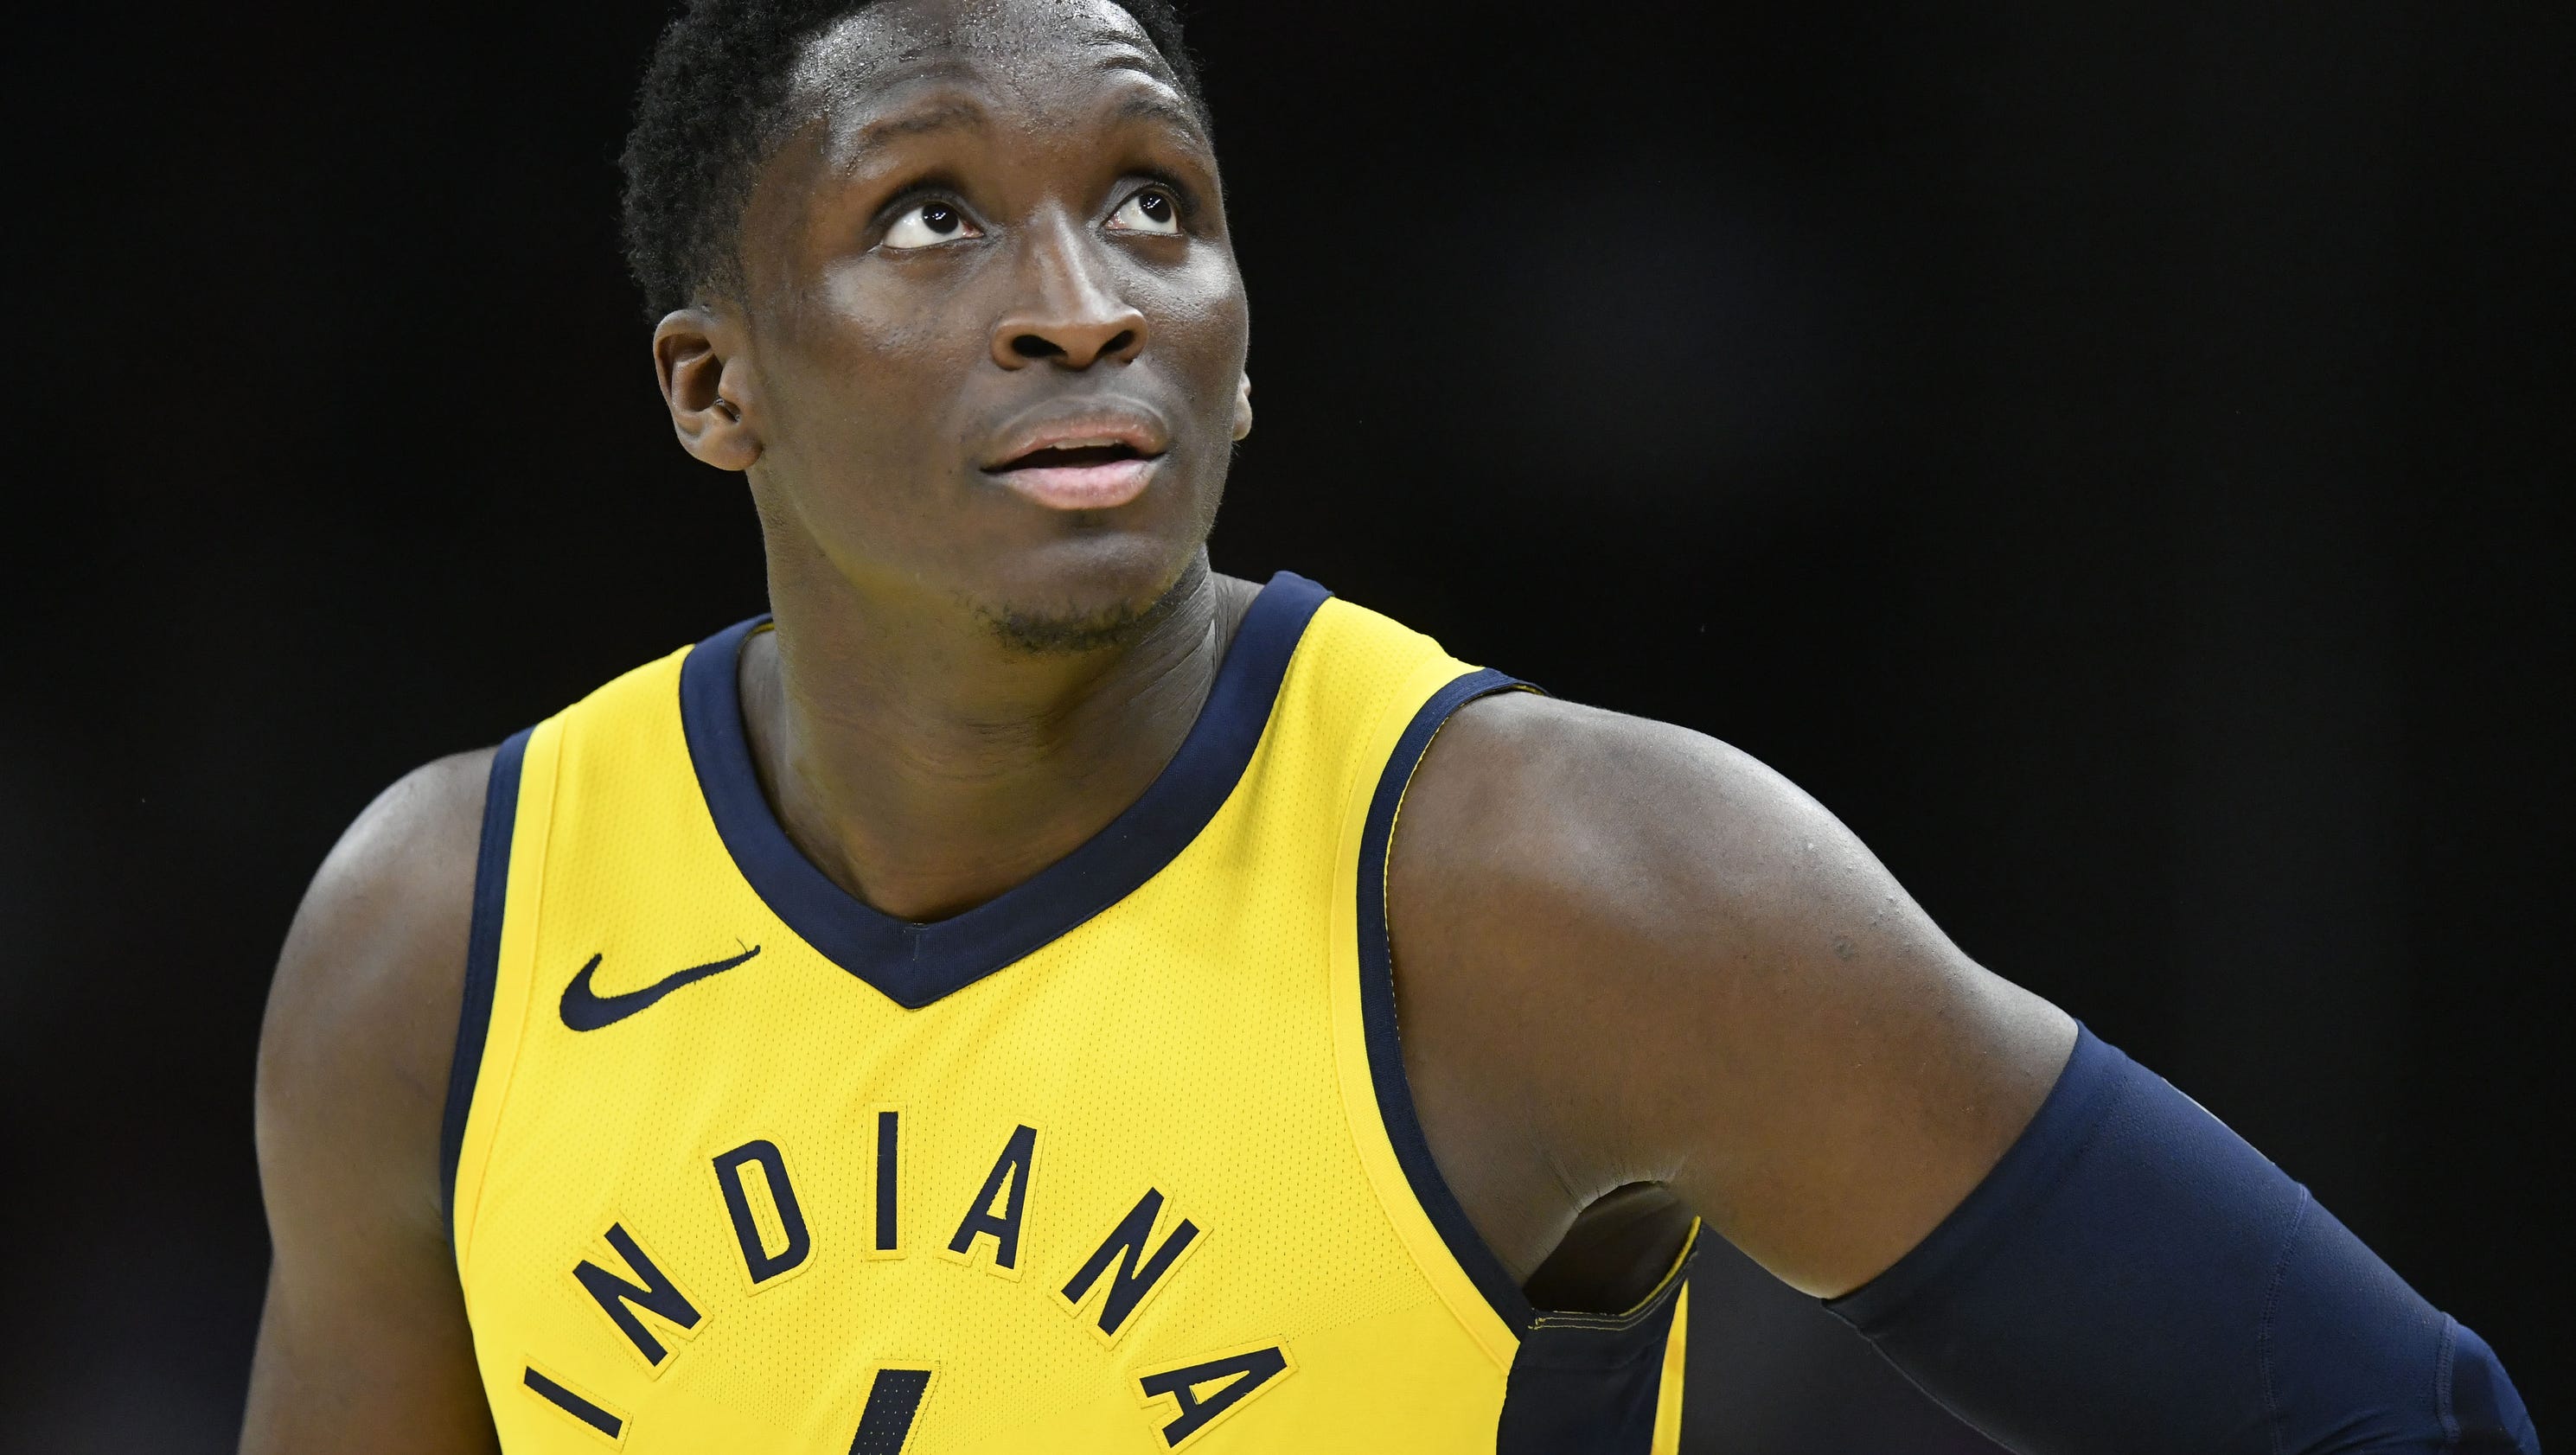 Victor Oladipo of the Pacers is up for a major NBA award